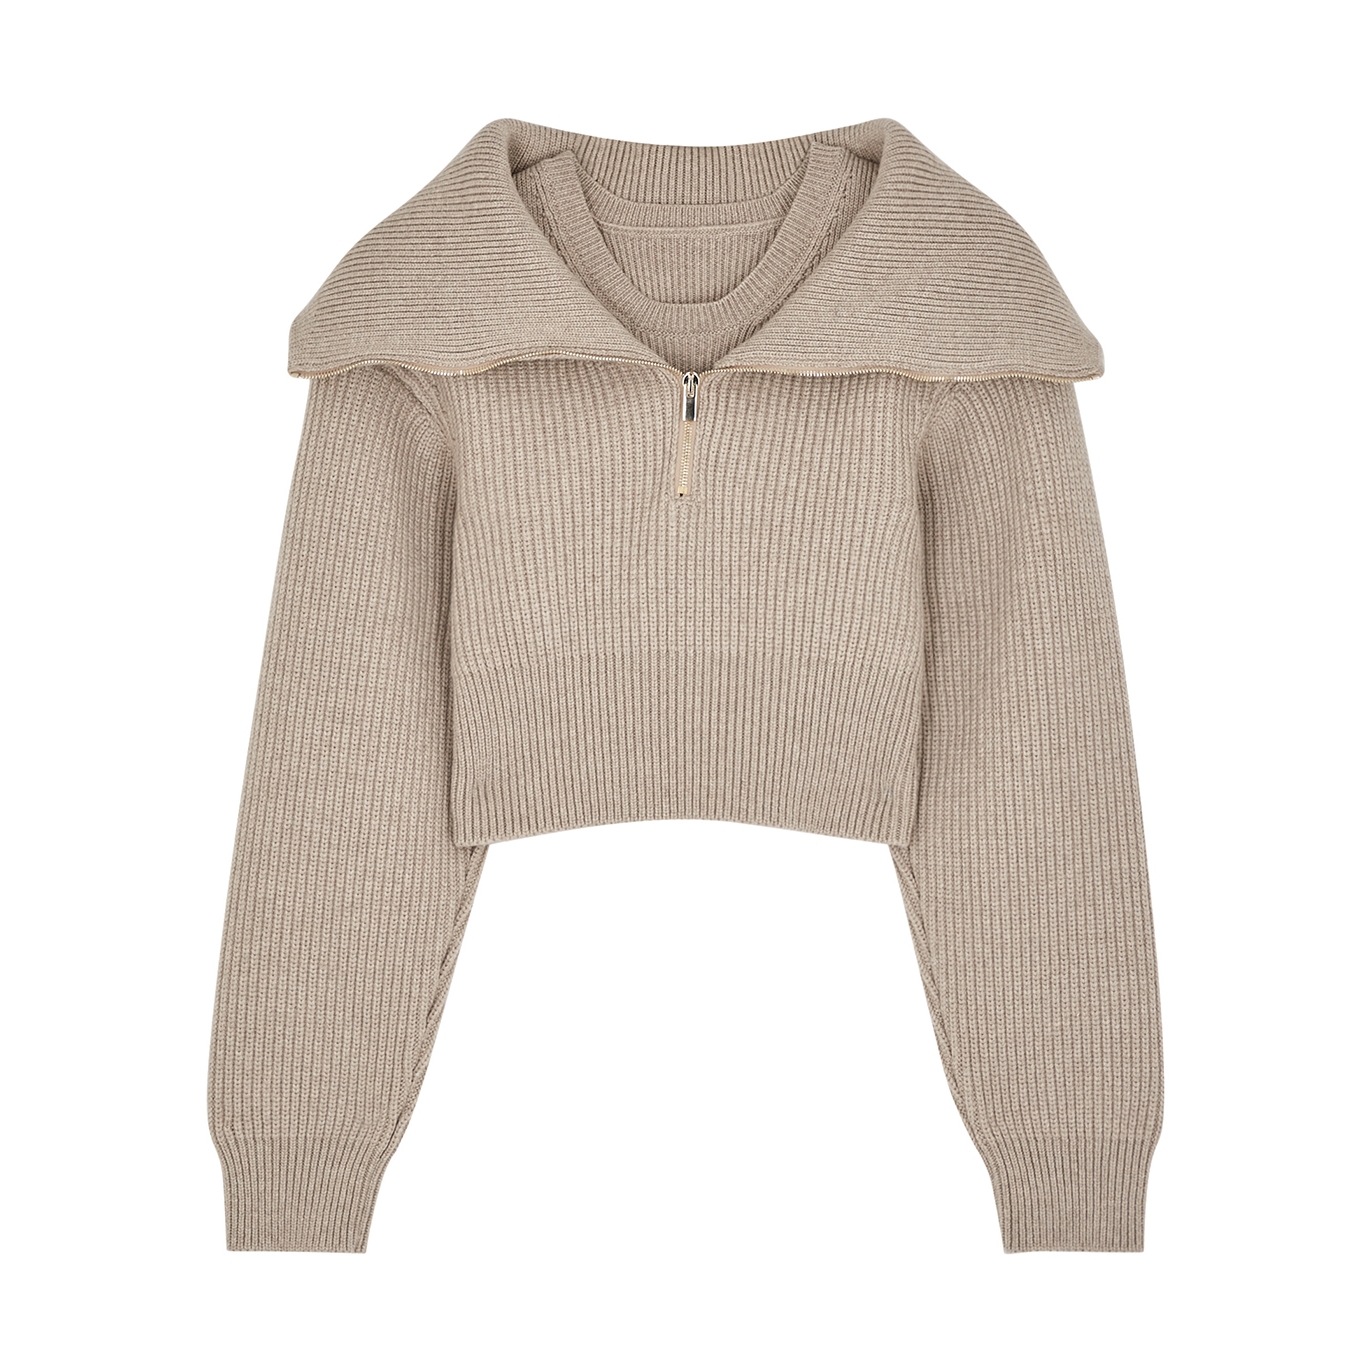 Jacquemus La Maille Risoul Taupe Cropped Wool Jumper - Light Brown - 14